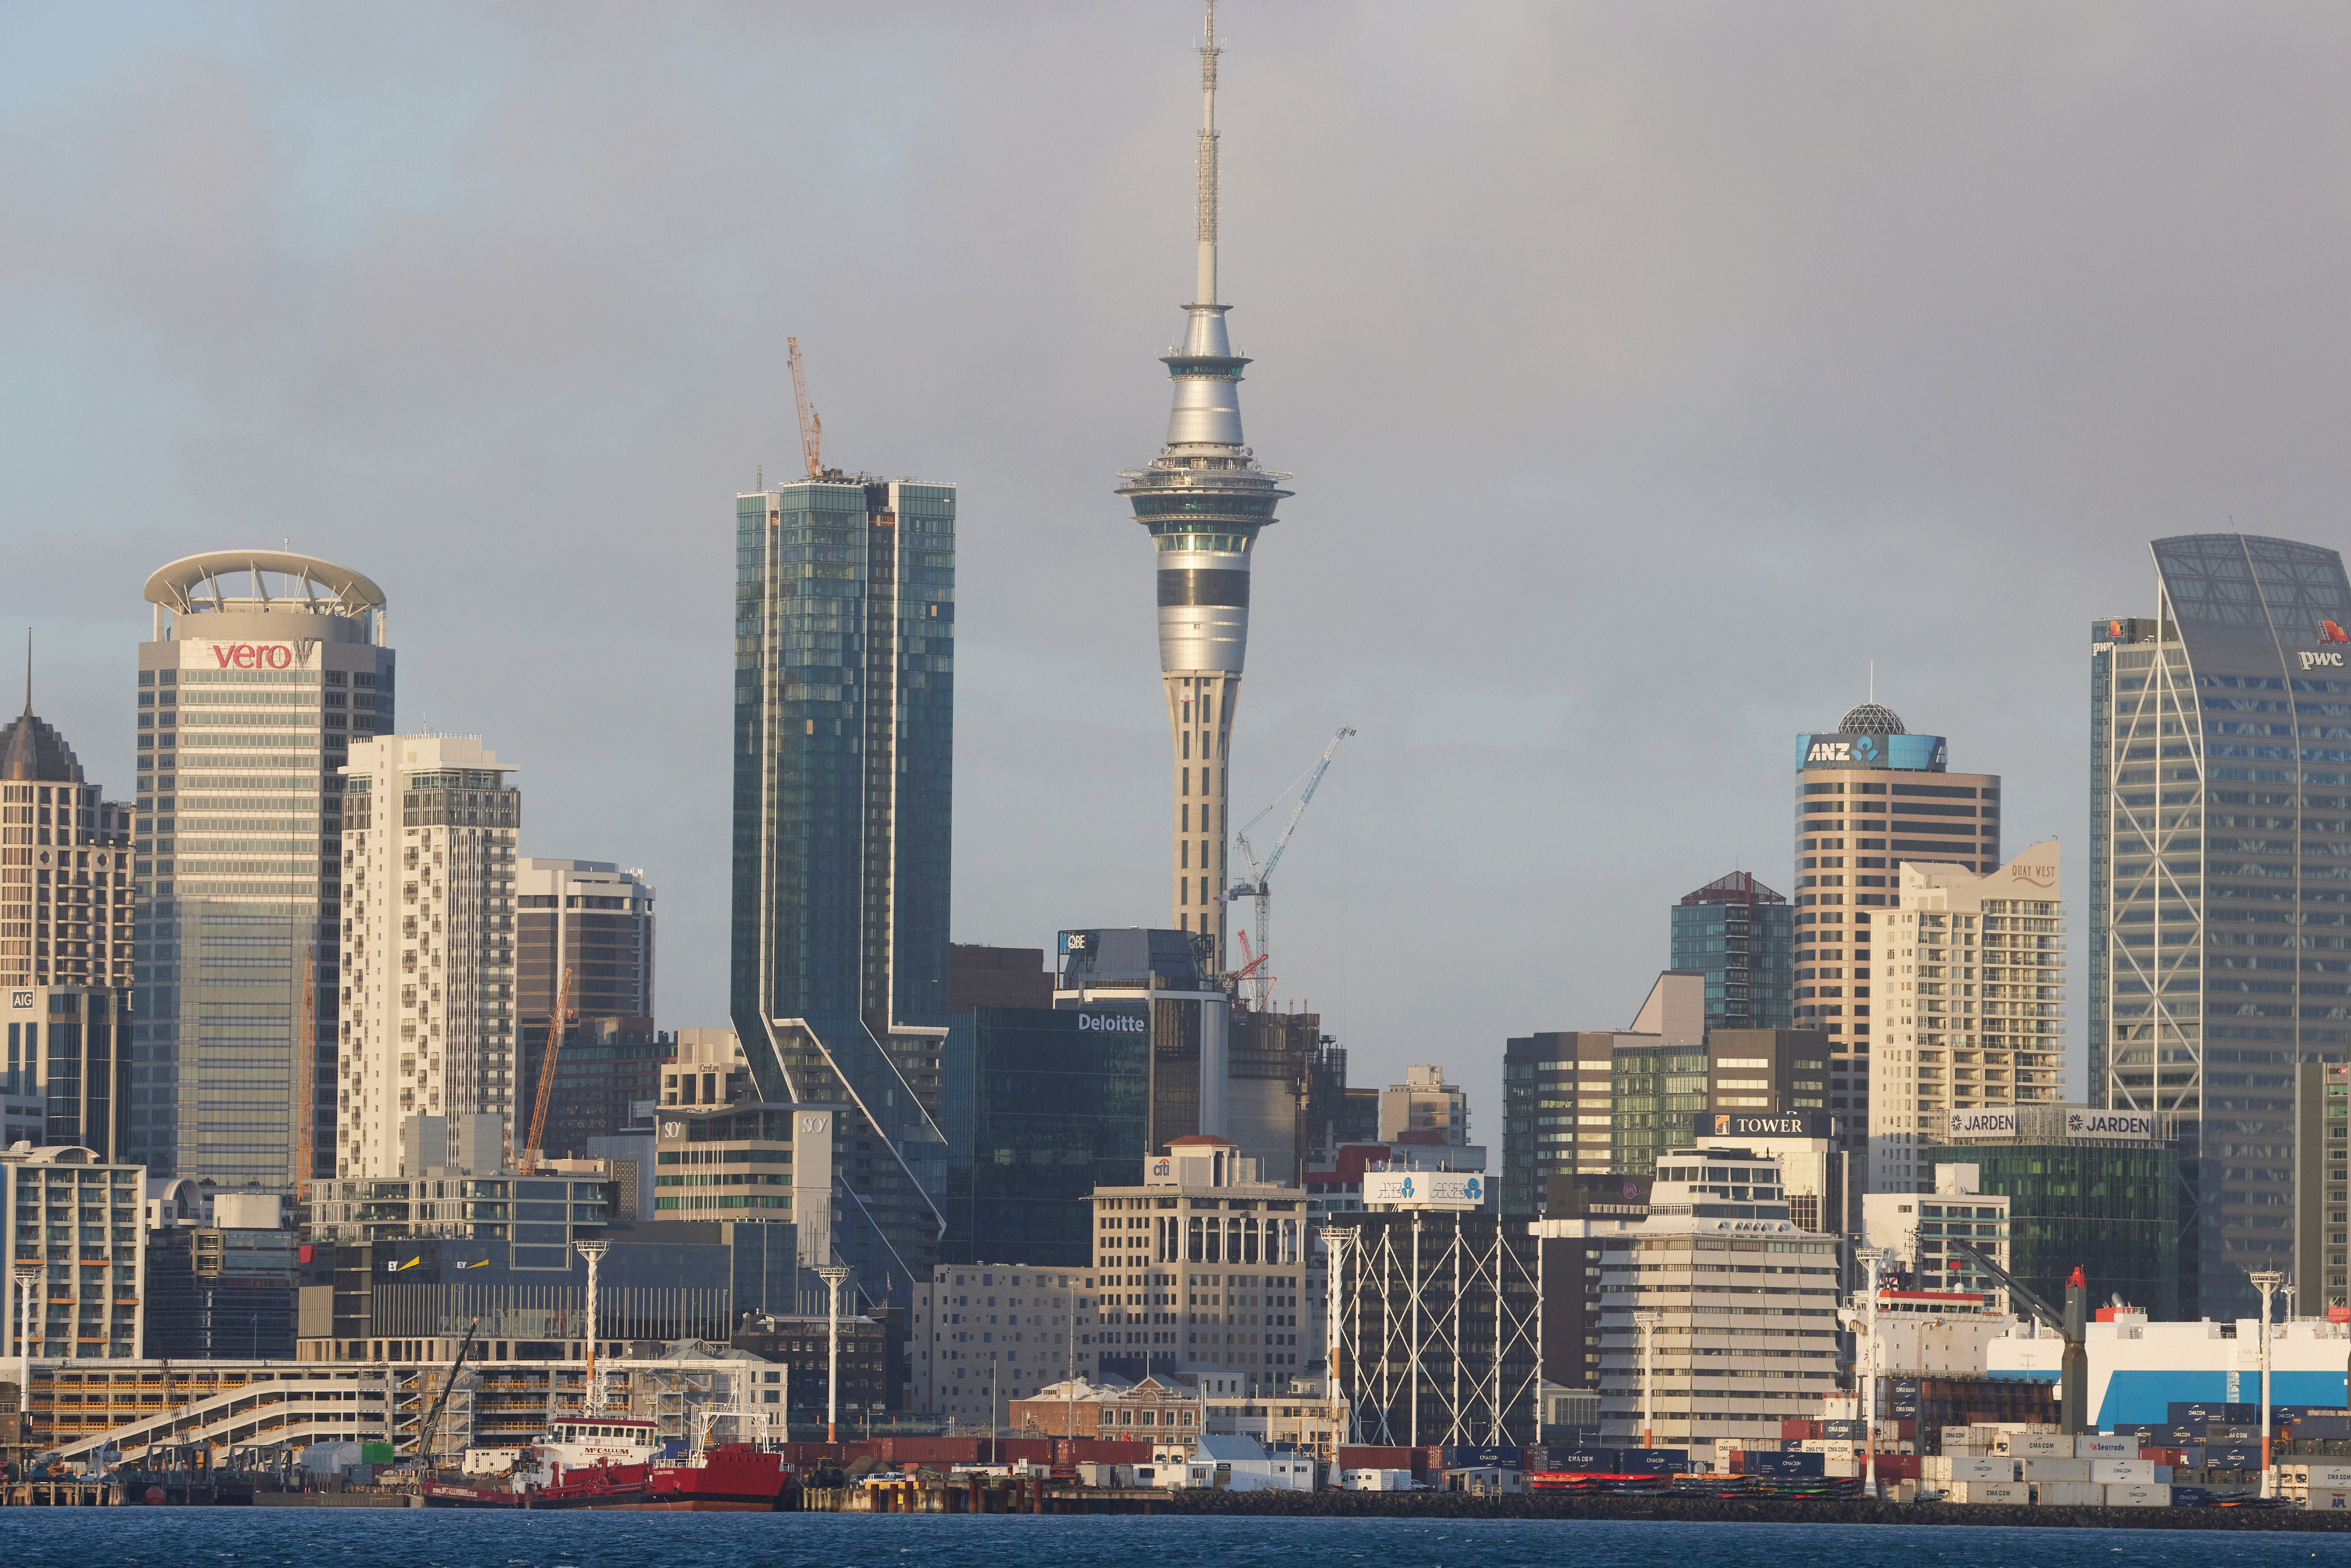 Auckland, New Zealand. The nation’s economy is predicted to struggle further in the coming months. Photo: Bloomberg